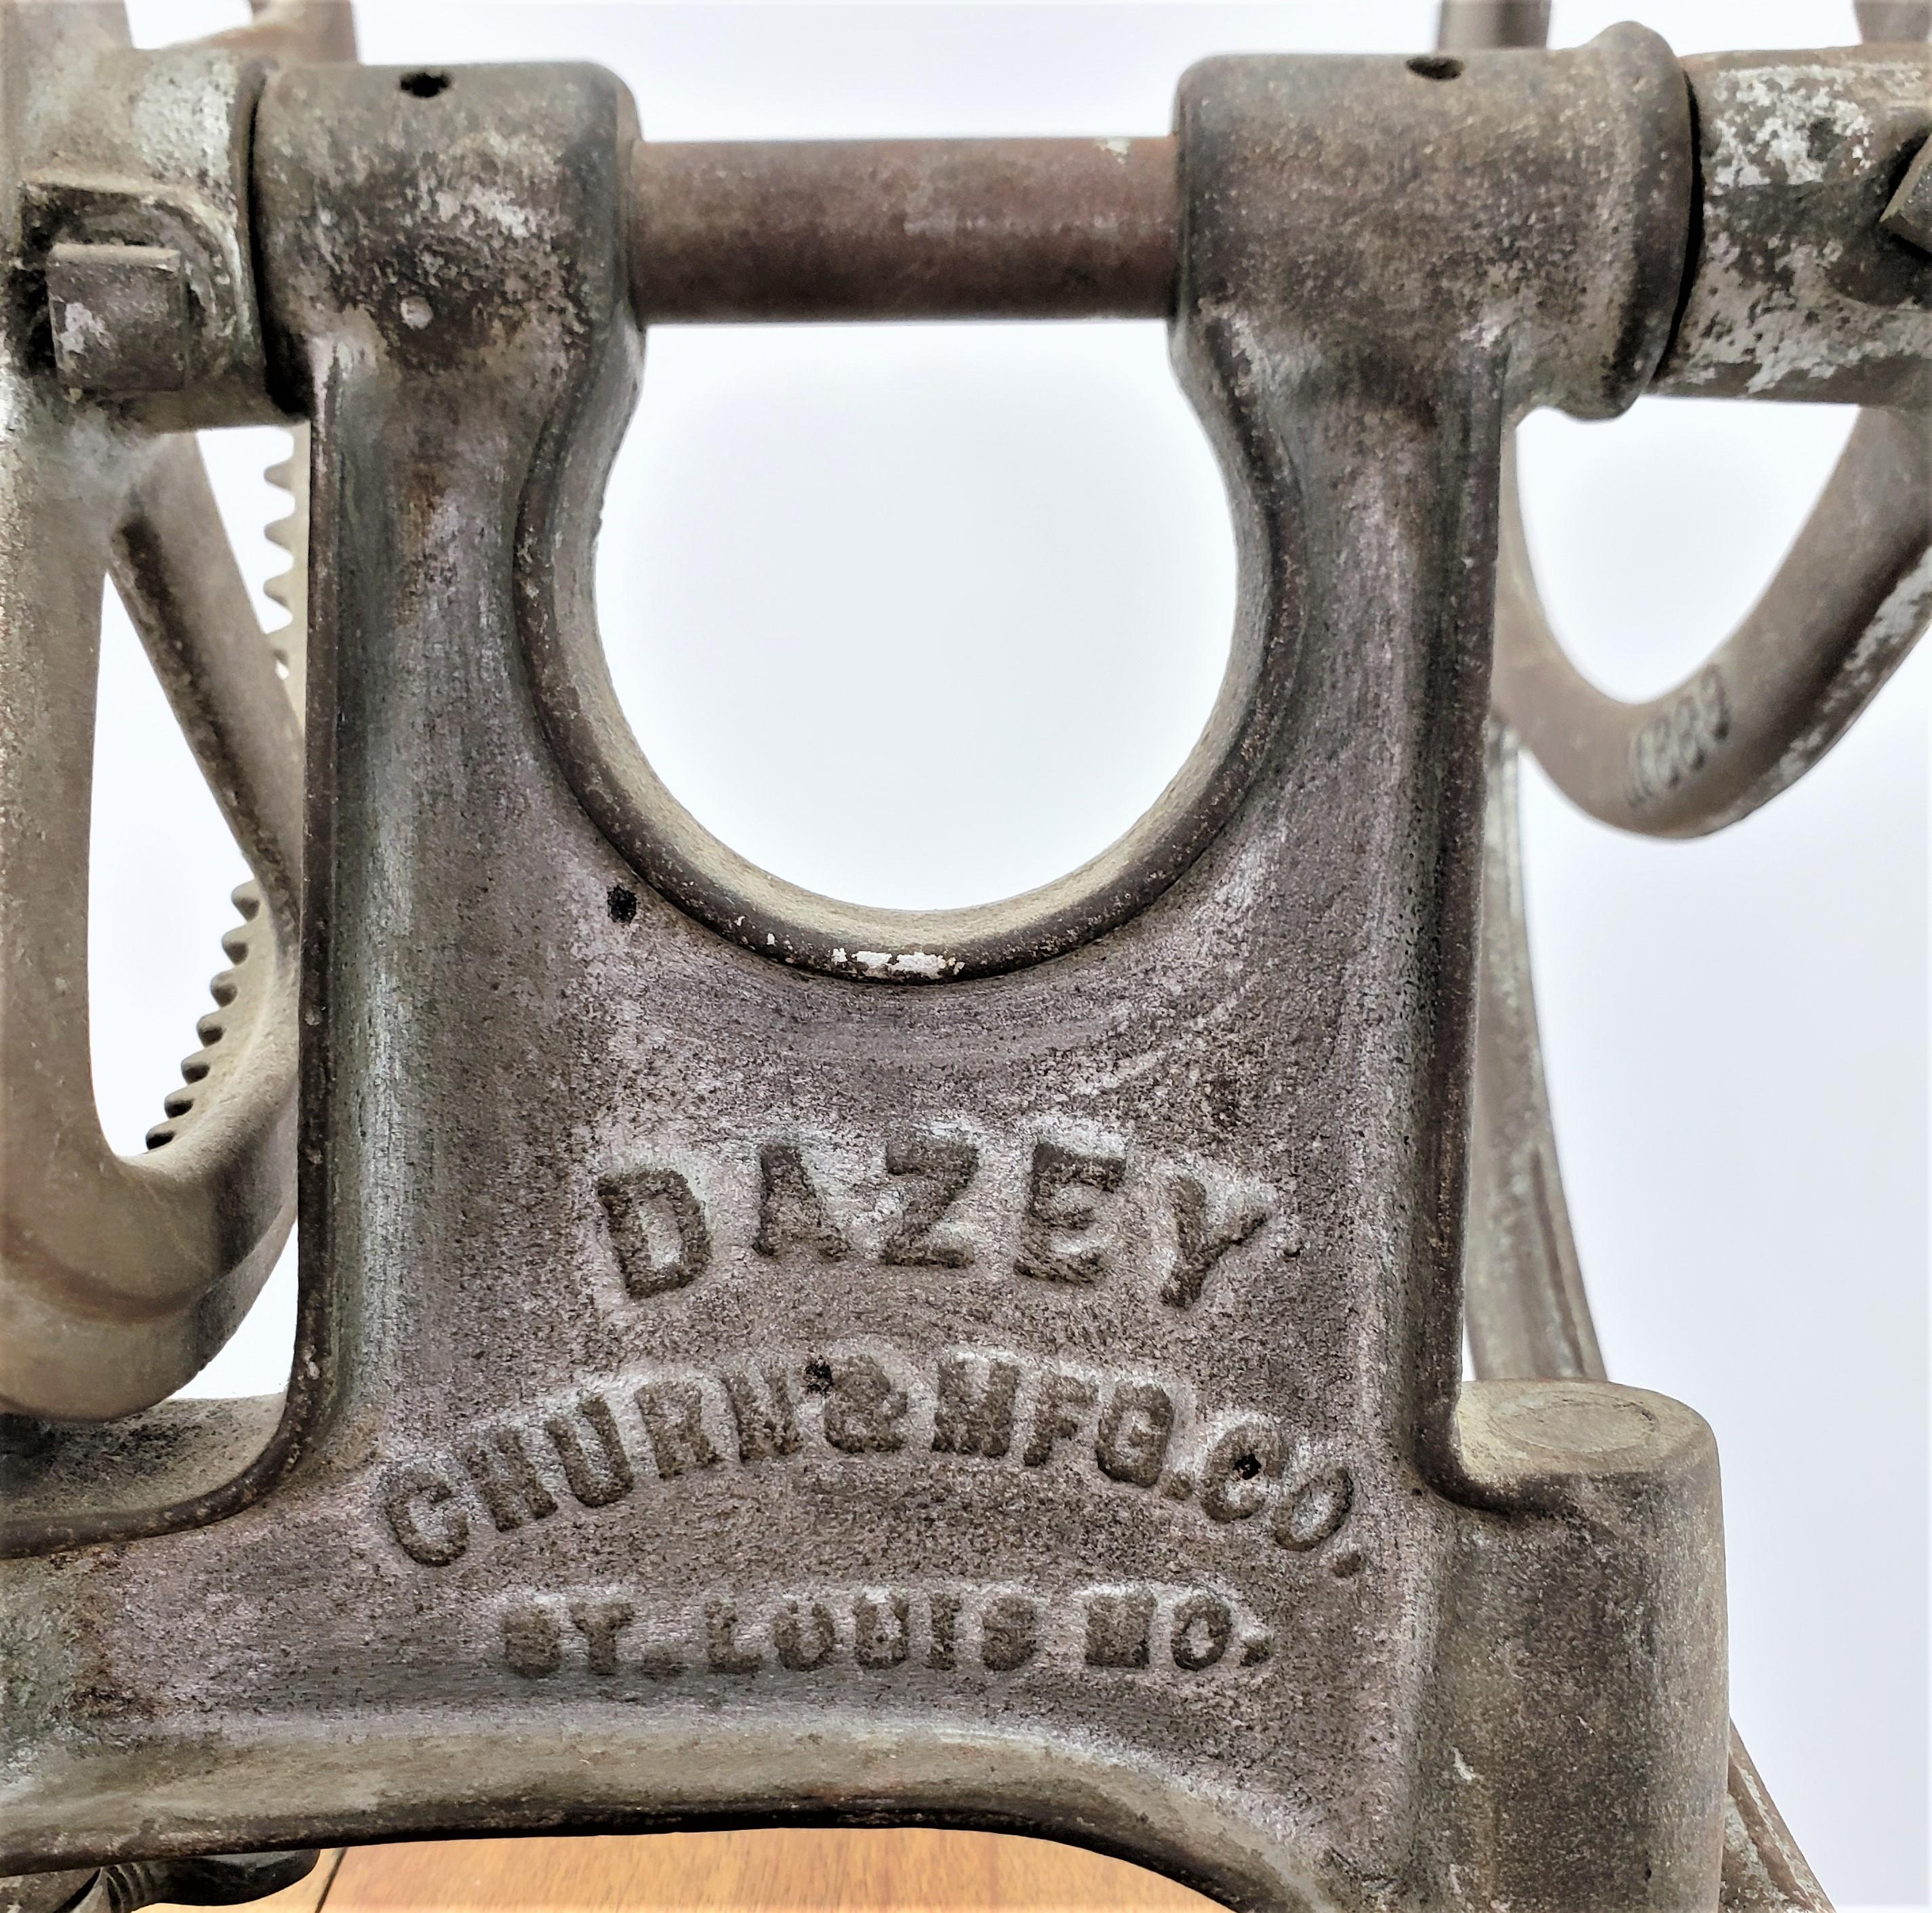 Metal Antique Dazey Commercial Industrial Churn or Mixer with Toleware Decoration USA For Sale